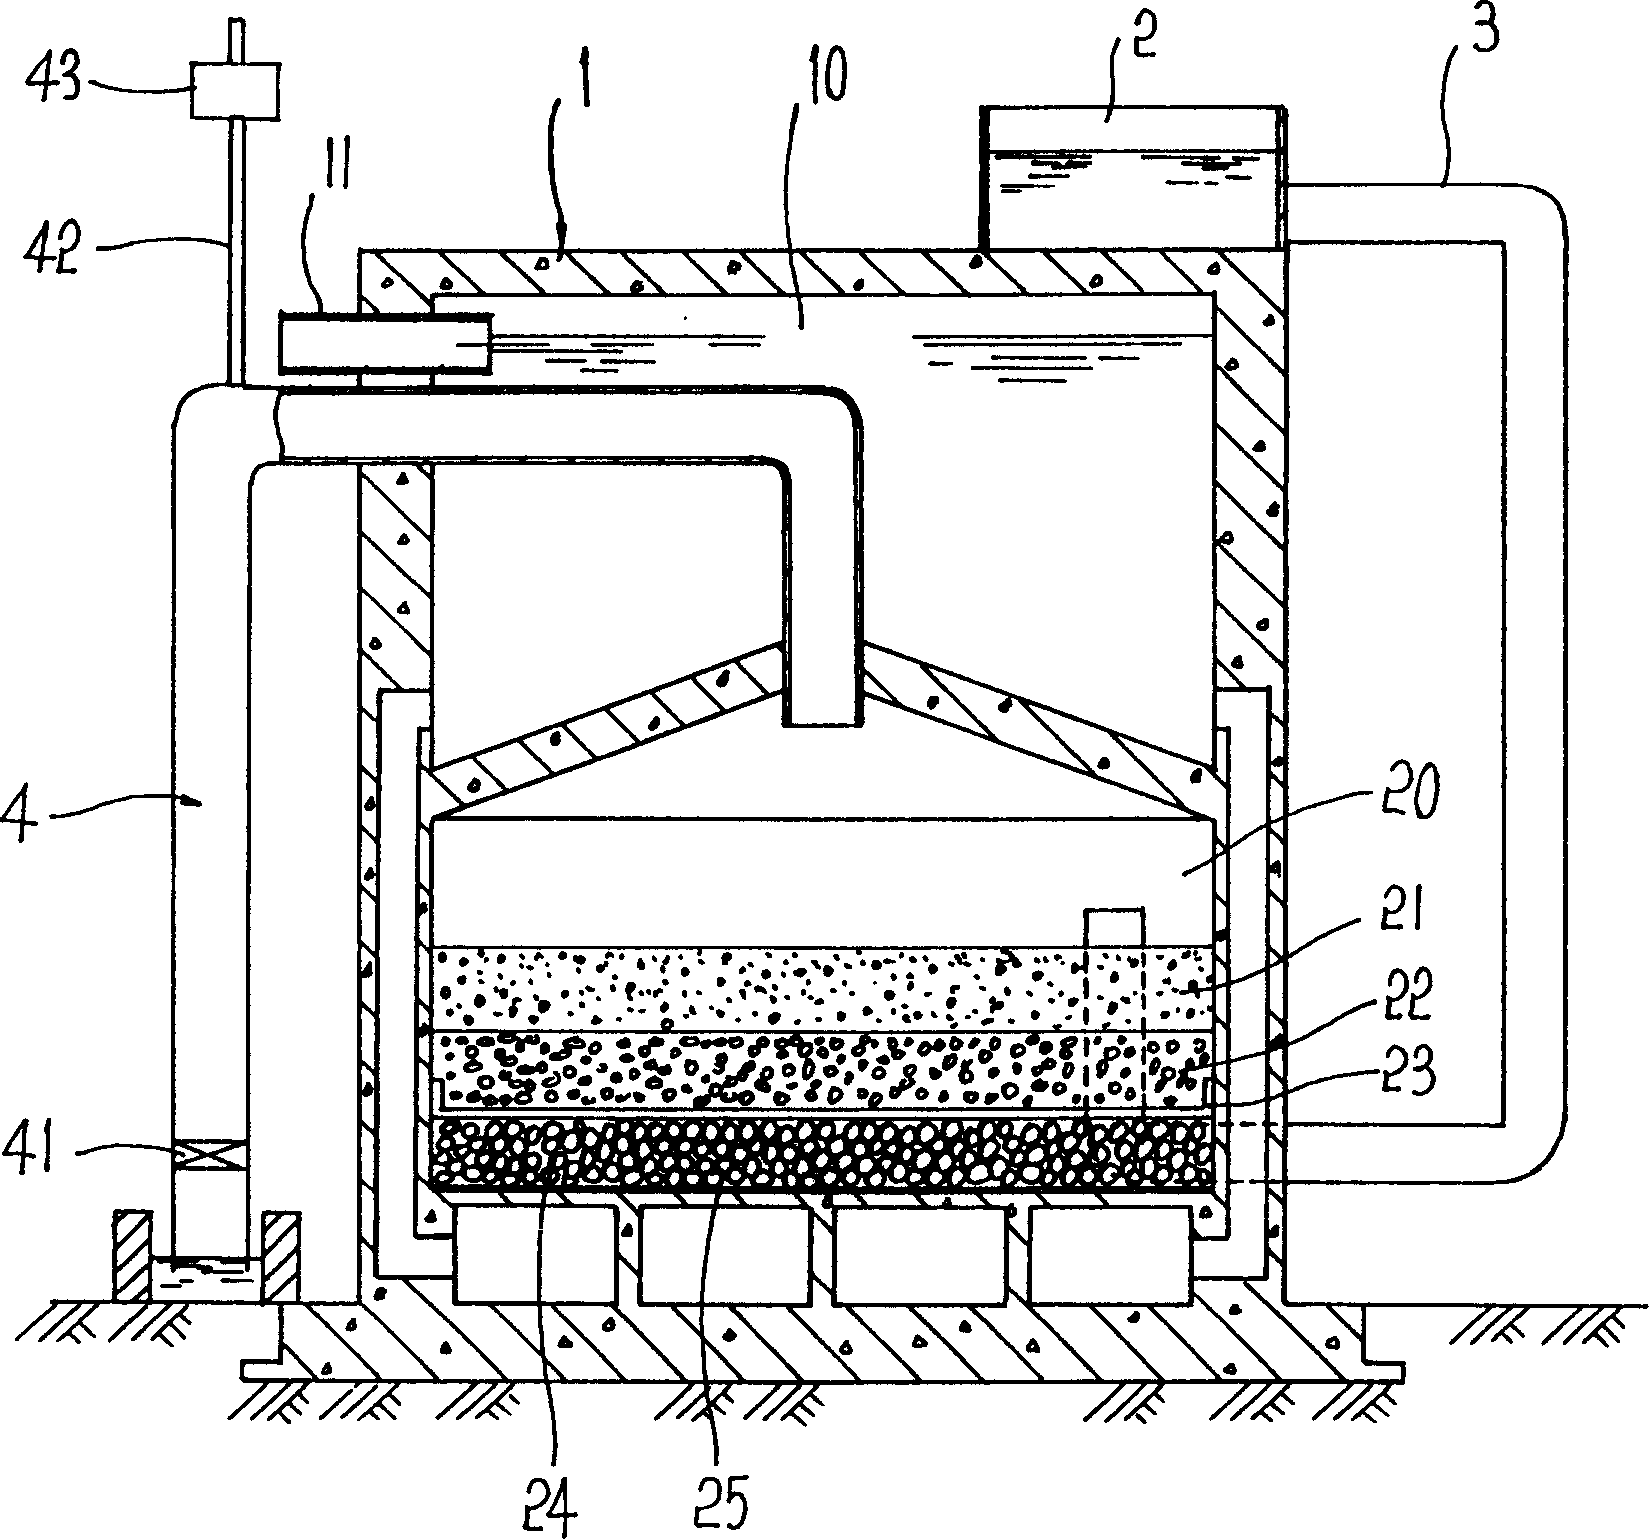 Water purification and filtration processing tank